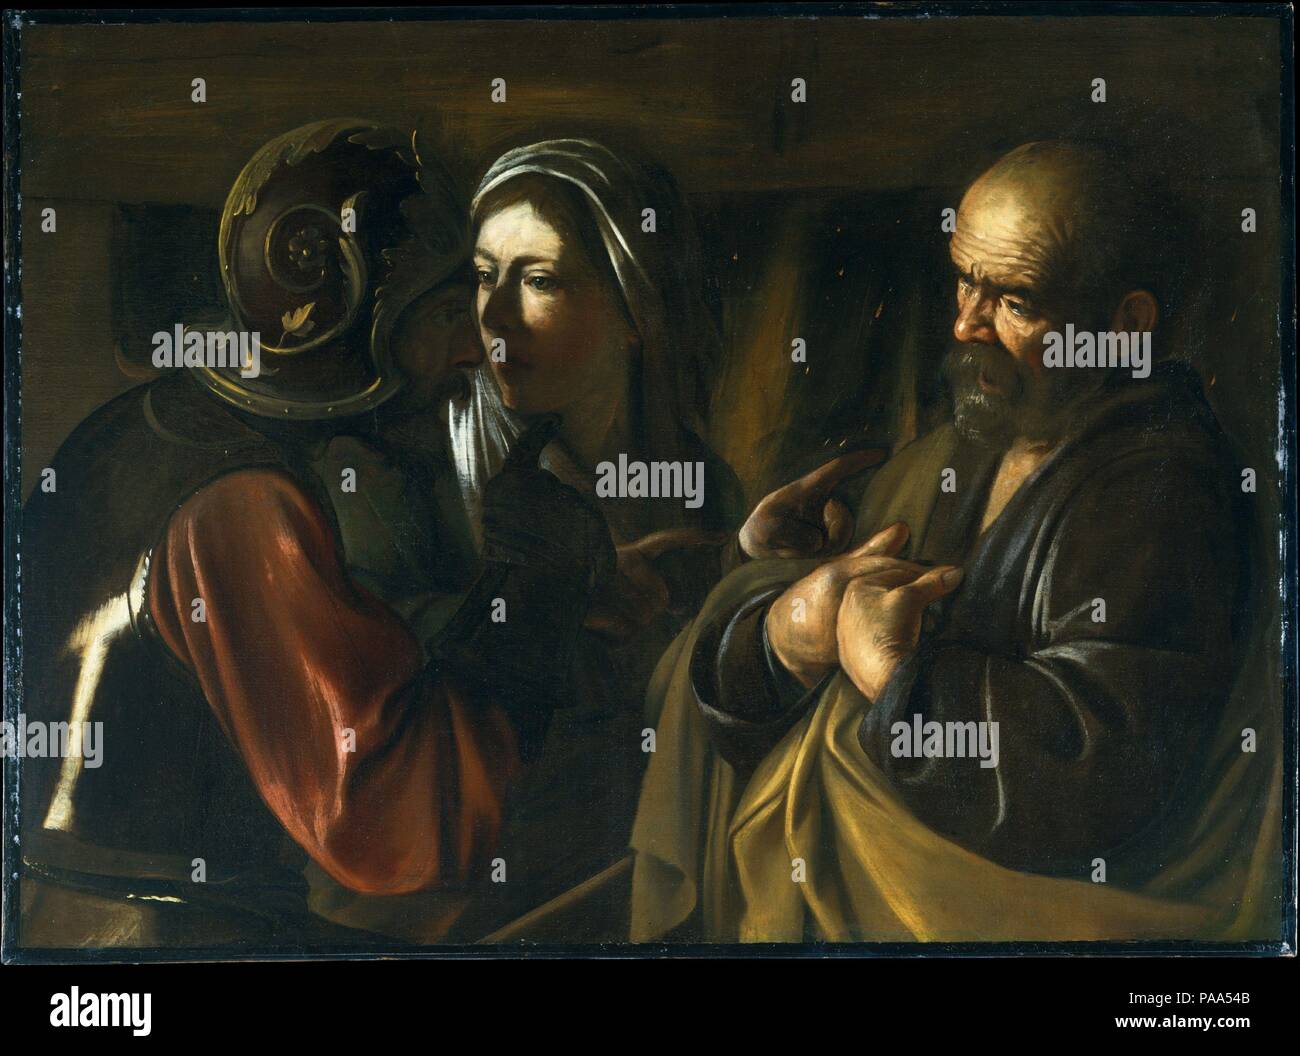 The Denial of Saint Peter. Artist: Caravaggio (Michelangelo Merisi) (Italian, Milan or Caravaggio 1571-1610 Porto Ercole). Dimensions: 37 x 49 3/8 in. (94 x 125.4 cm). Date: 1610.  Caravaggio's late works depend for their dramatic effect on brightly lit areas standing in contrast to a dark background. The picture, a marvel of narrative concision, was painted in the last months of Caravaggio's tempestuous life and marks an extreme stage in his revolutionary style. Standing before a fireplace, Peter is accused of being a follower of Jesus. The pointing finger of the soldier and two fingers of th Stock Photo